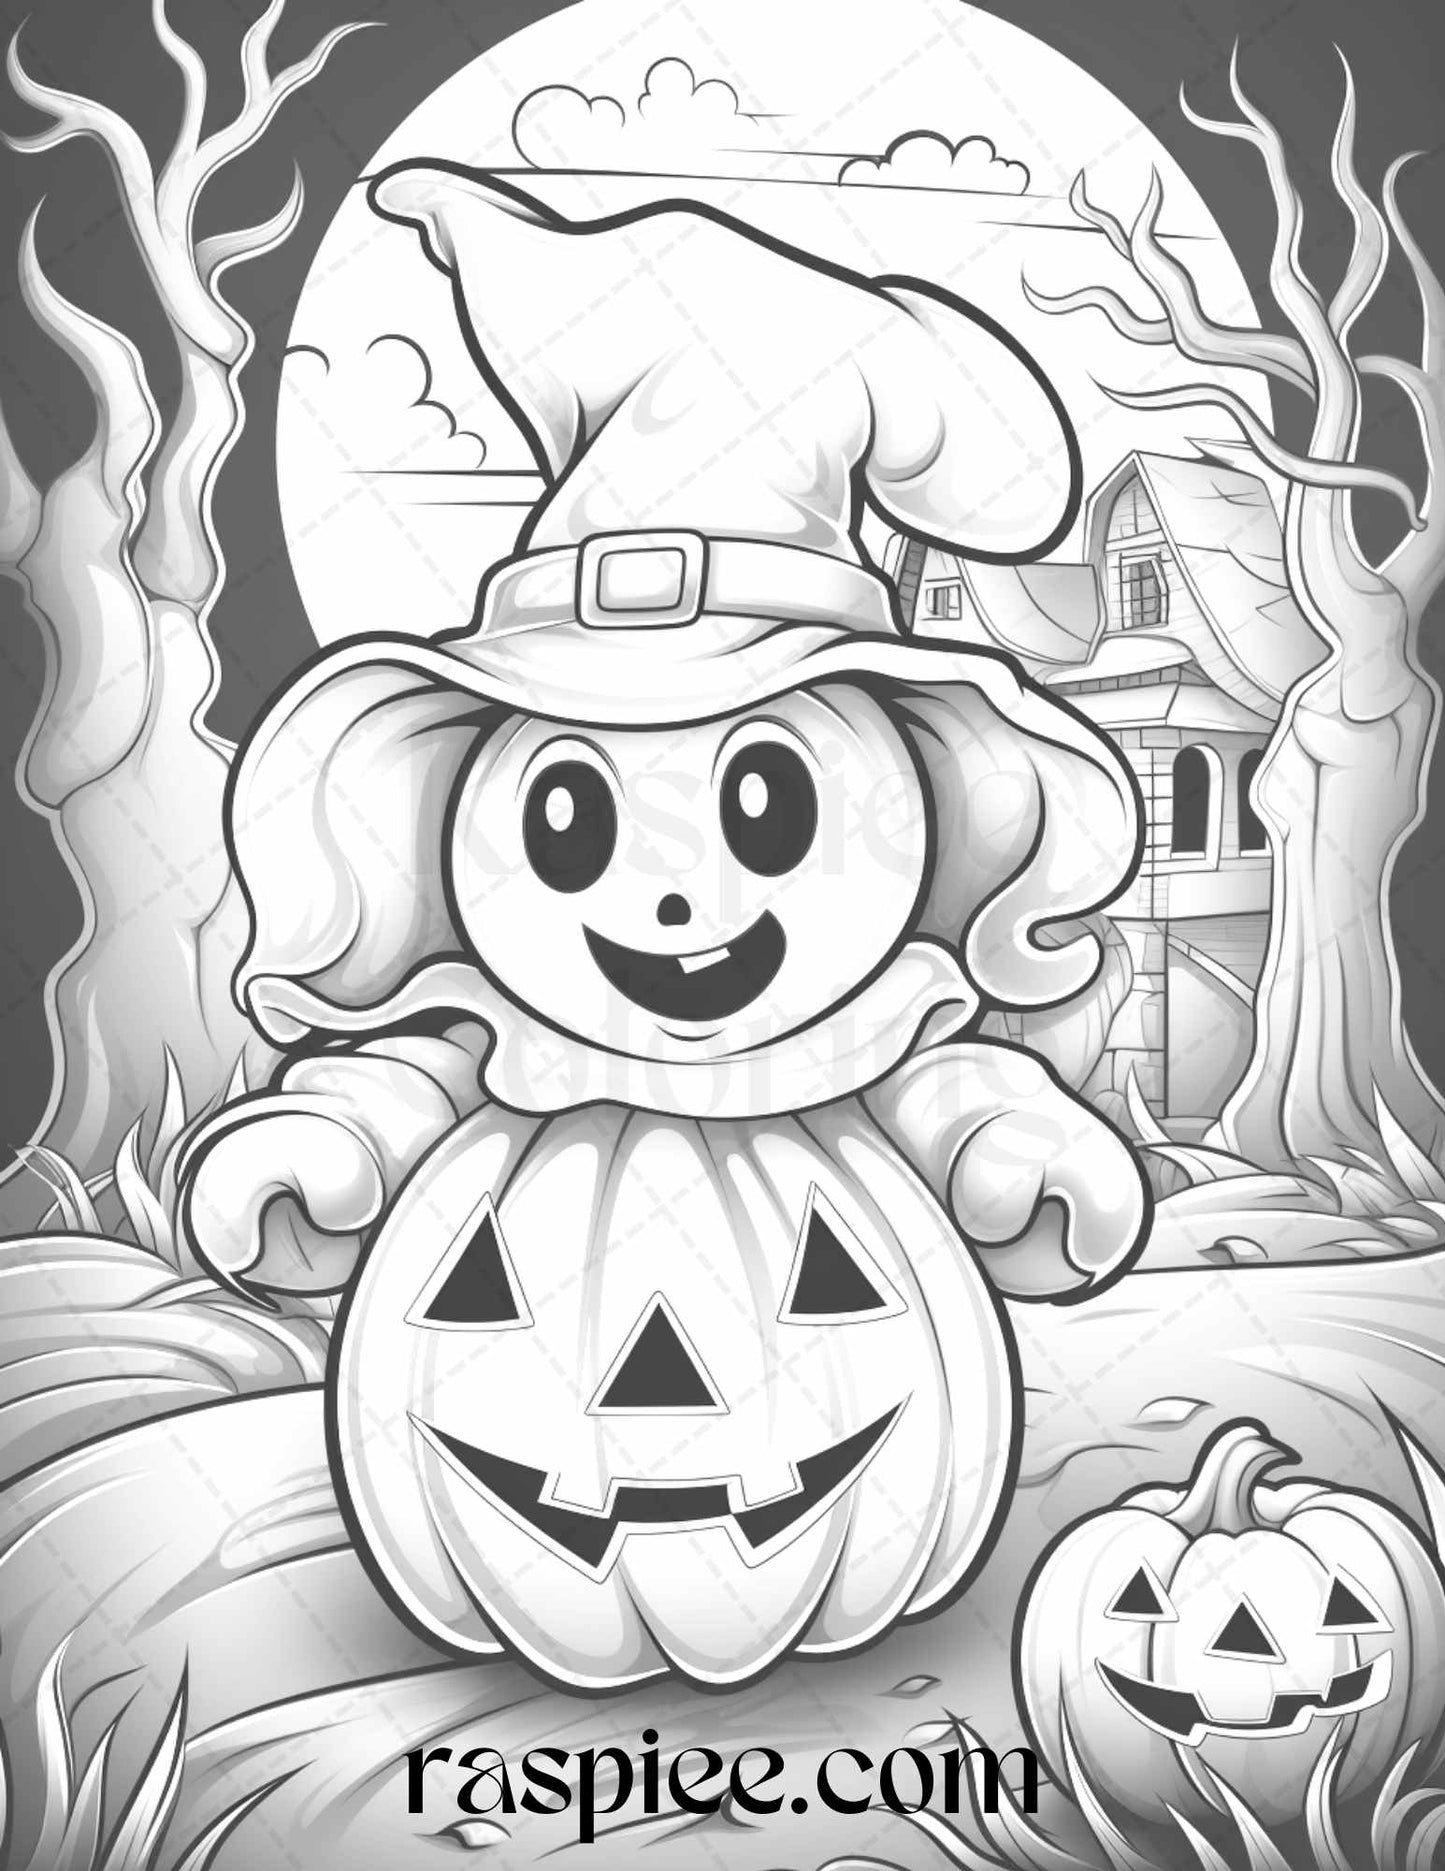 Halloween Cute Ghosts Grayscale Coloring Printable for Adults and Kids, Instant Download Fun Halloween Activity, Ghost-themed Coloring Sheets, Digital Download Halloween Crafts, Family-friendly Halloween Party Activity"